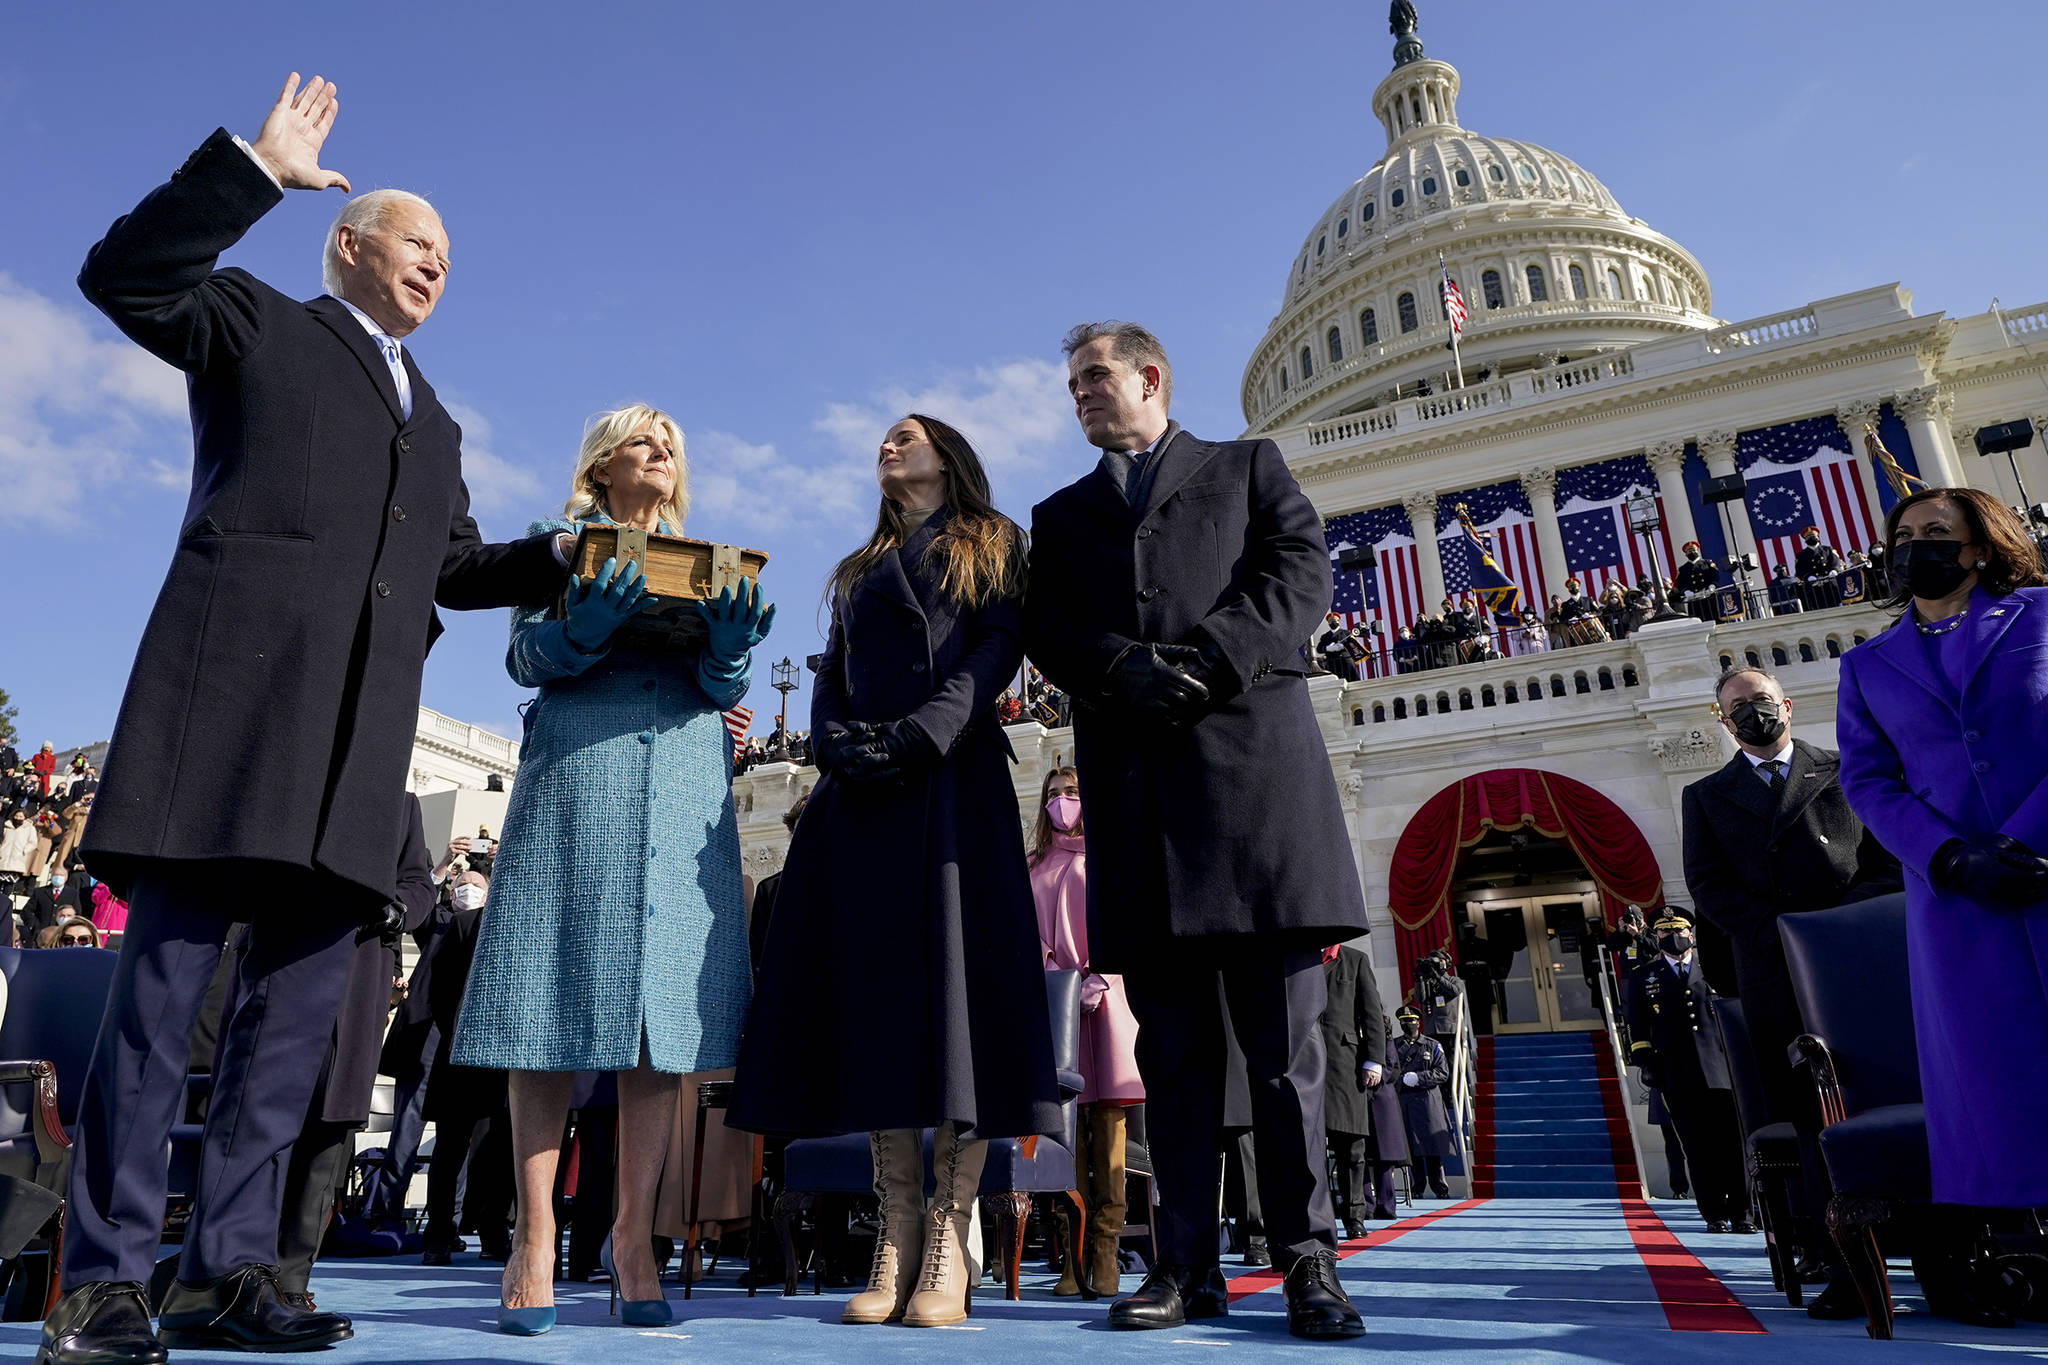 Joe Biden is sworn in as the 46th president of the United States by Chief Justice John Roberts as Jill Biden holds the Bible during the 59th Presidential Inauguration at the U.S. Capitol in Washington, Wednesday, Jan. 20, 2021, as their children Ashley and Hunter watch.(AP Photo / Andrew Harnik, Pool)